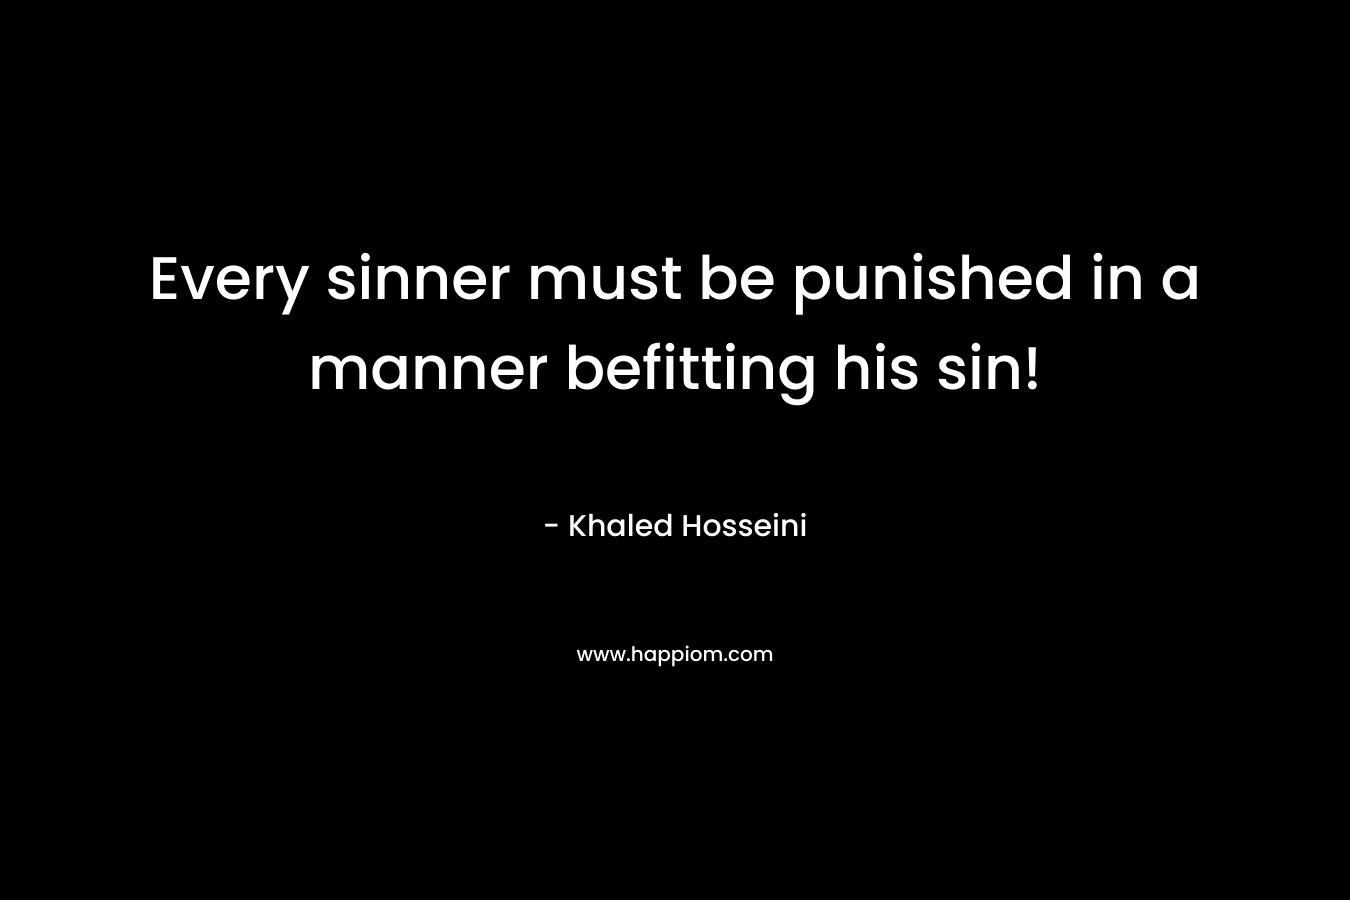 Every sinner must be punished in a manner befitting his sin! – Khaled Hosseini